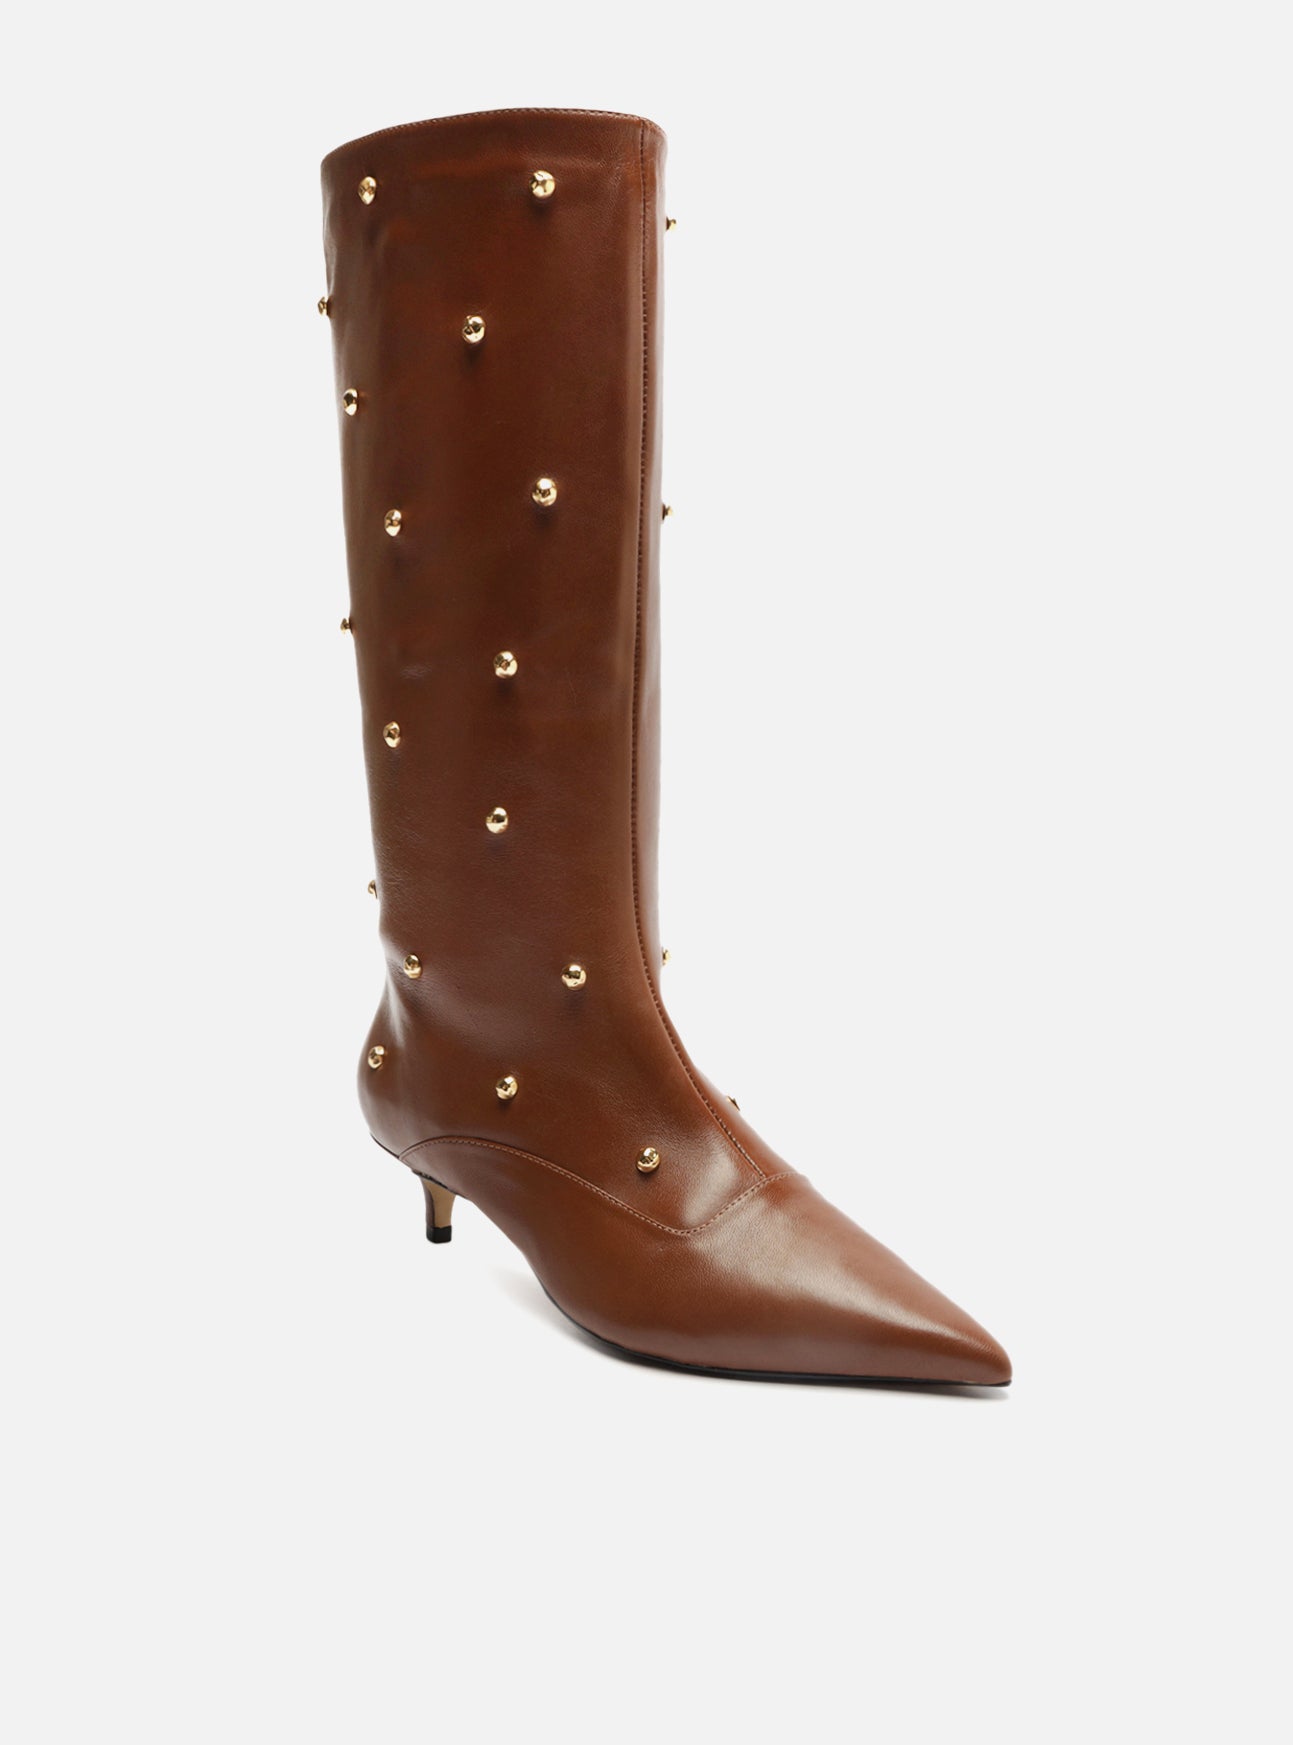 The Campaign Leather Boot